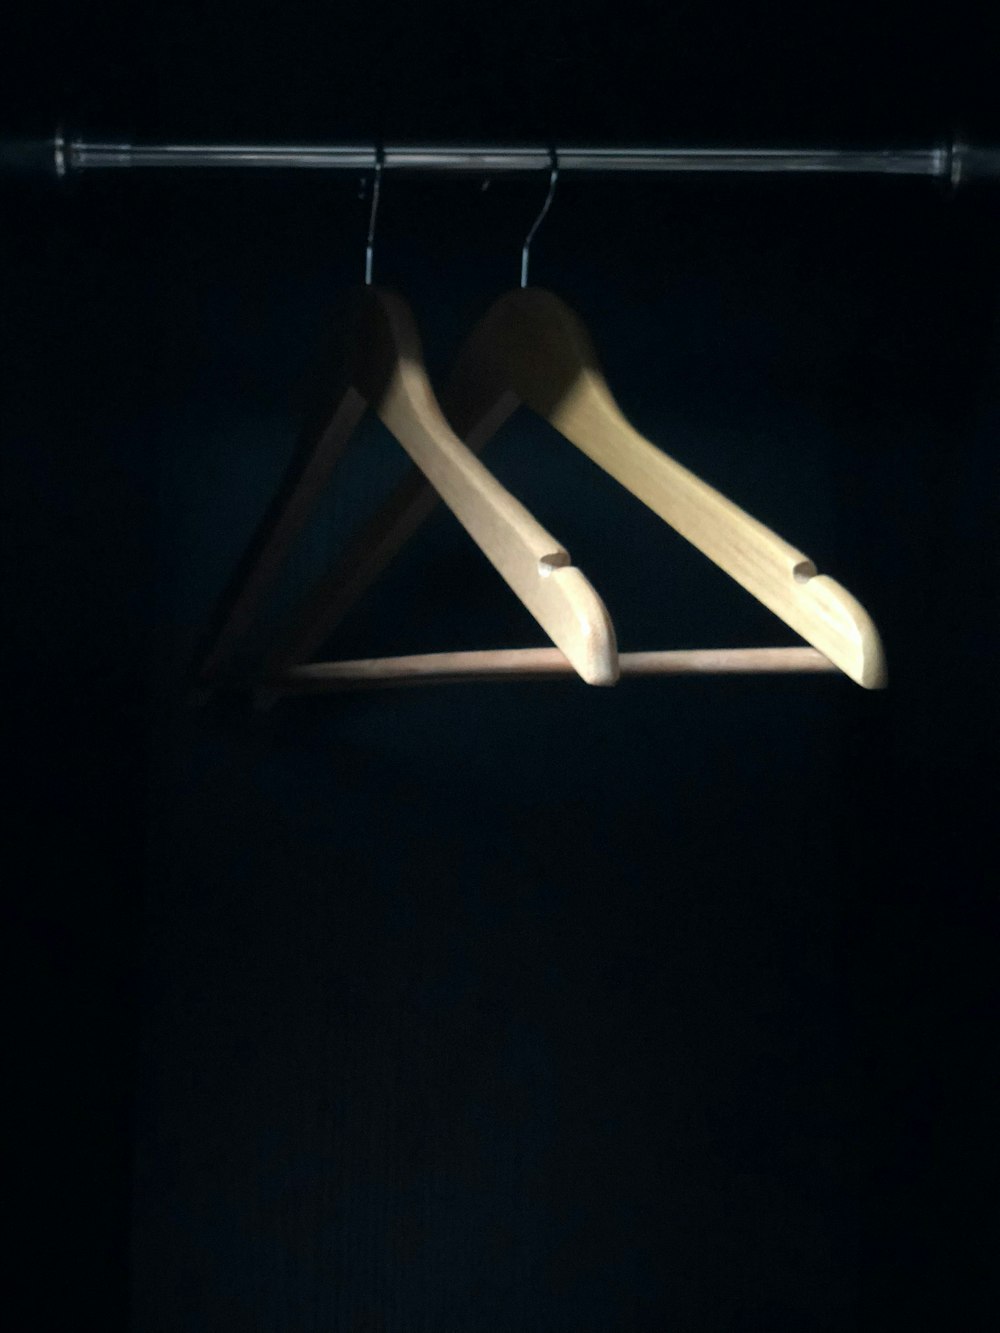 a pair of wooden clothes hangers in a dark room